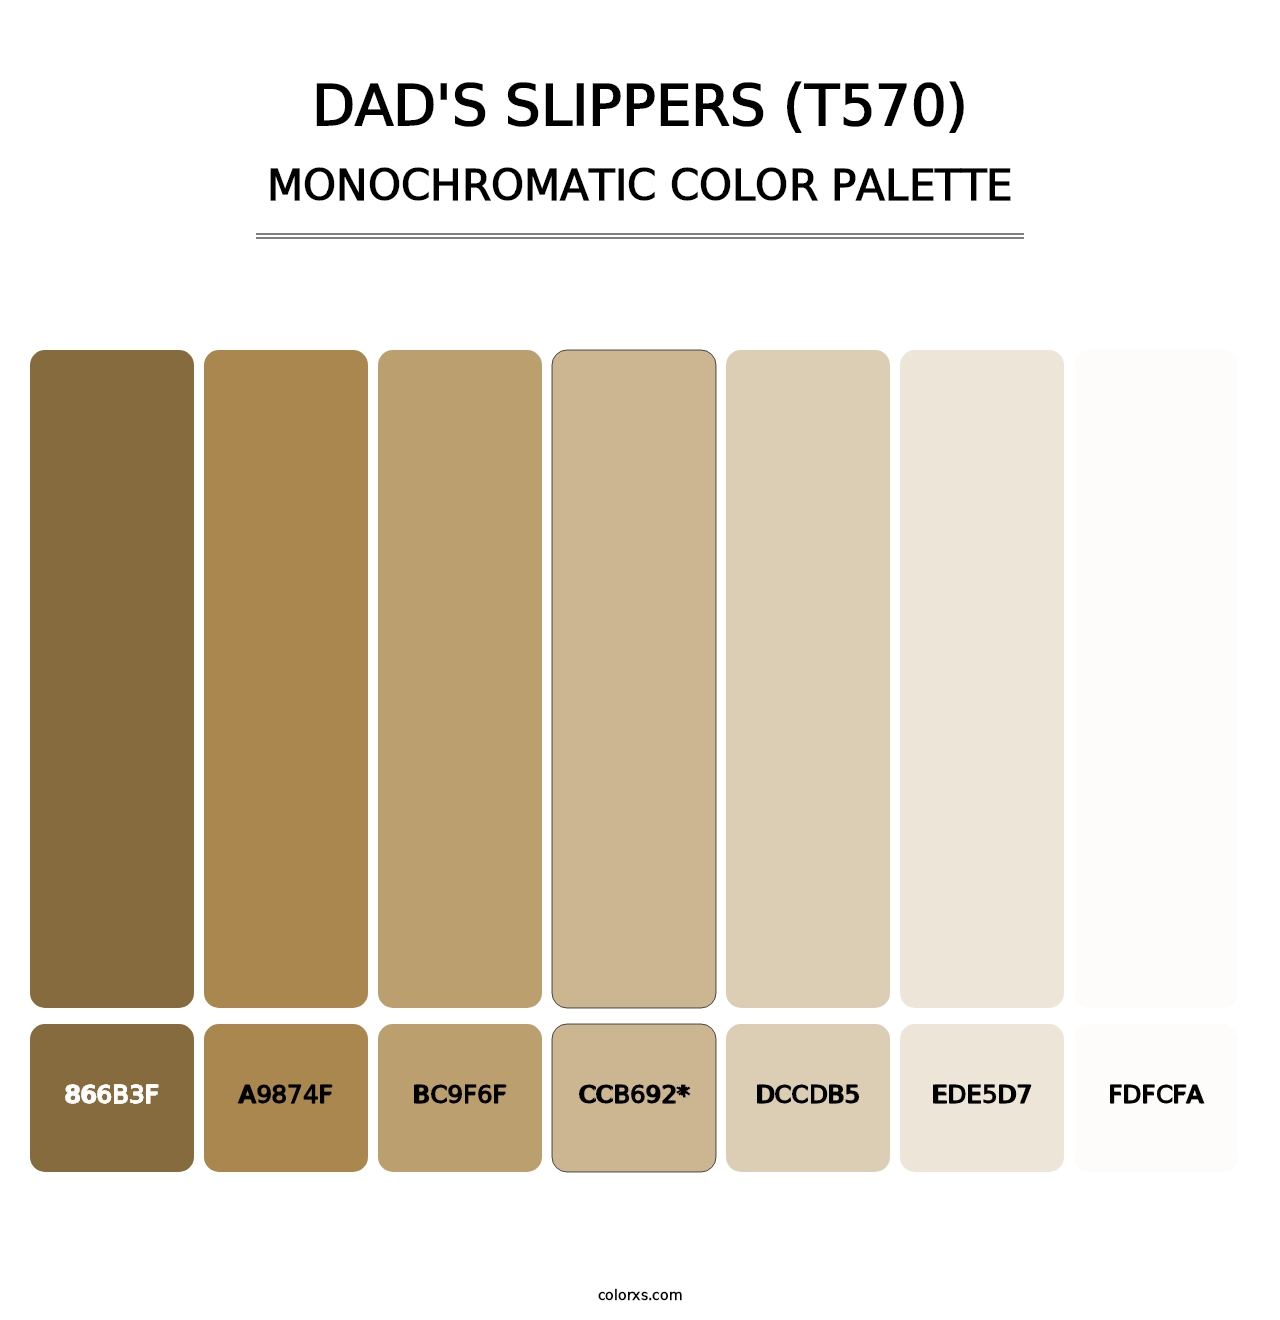 Dad's Slippers (T570) - Monochromatic Color Palette